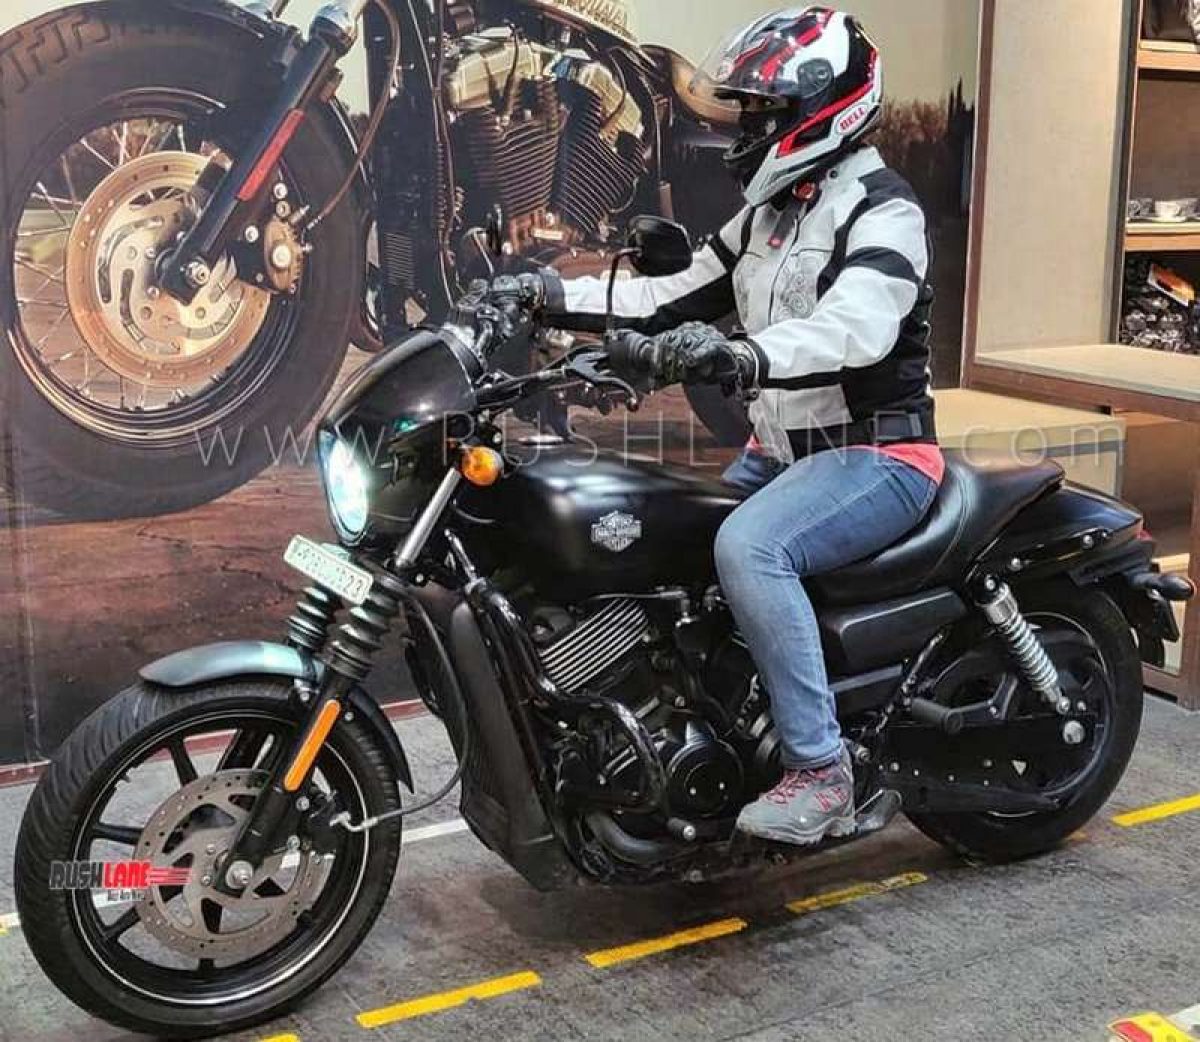 Harley Davidson Street 750 Discount Of Rs 1 Lakh Announced By Dealer